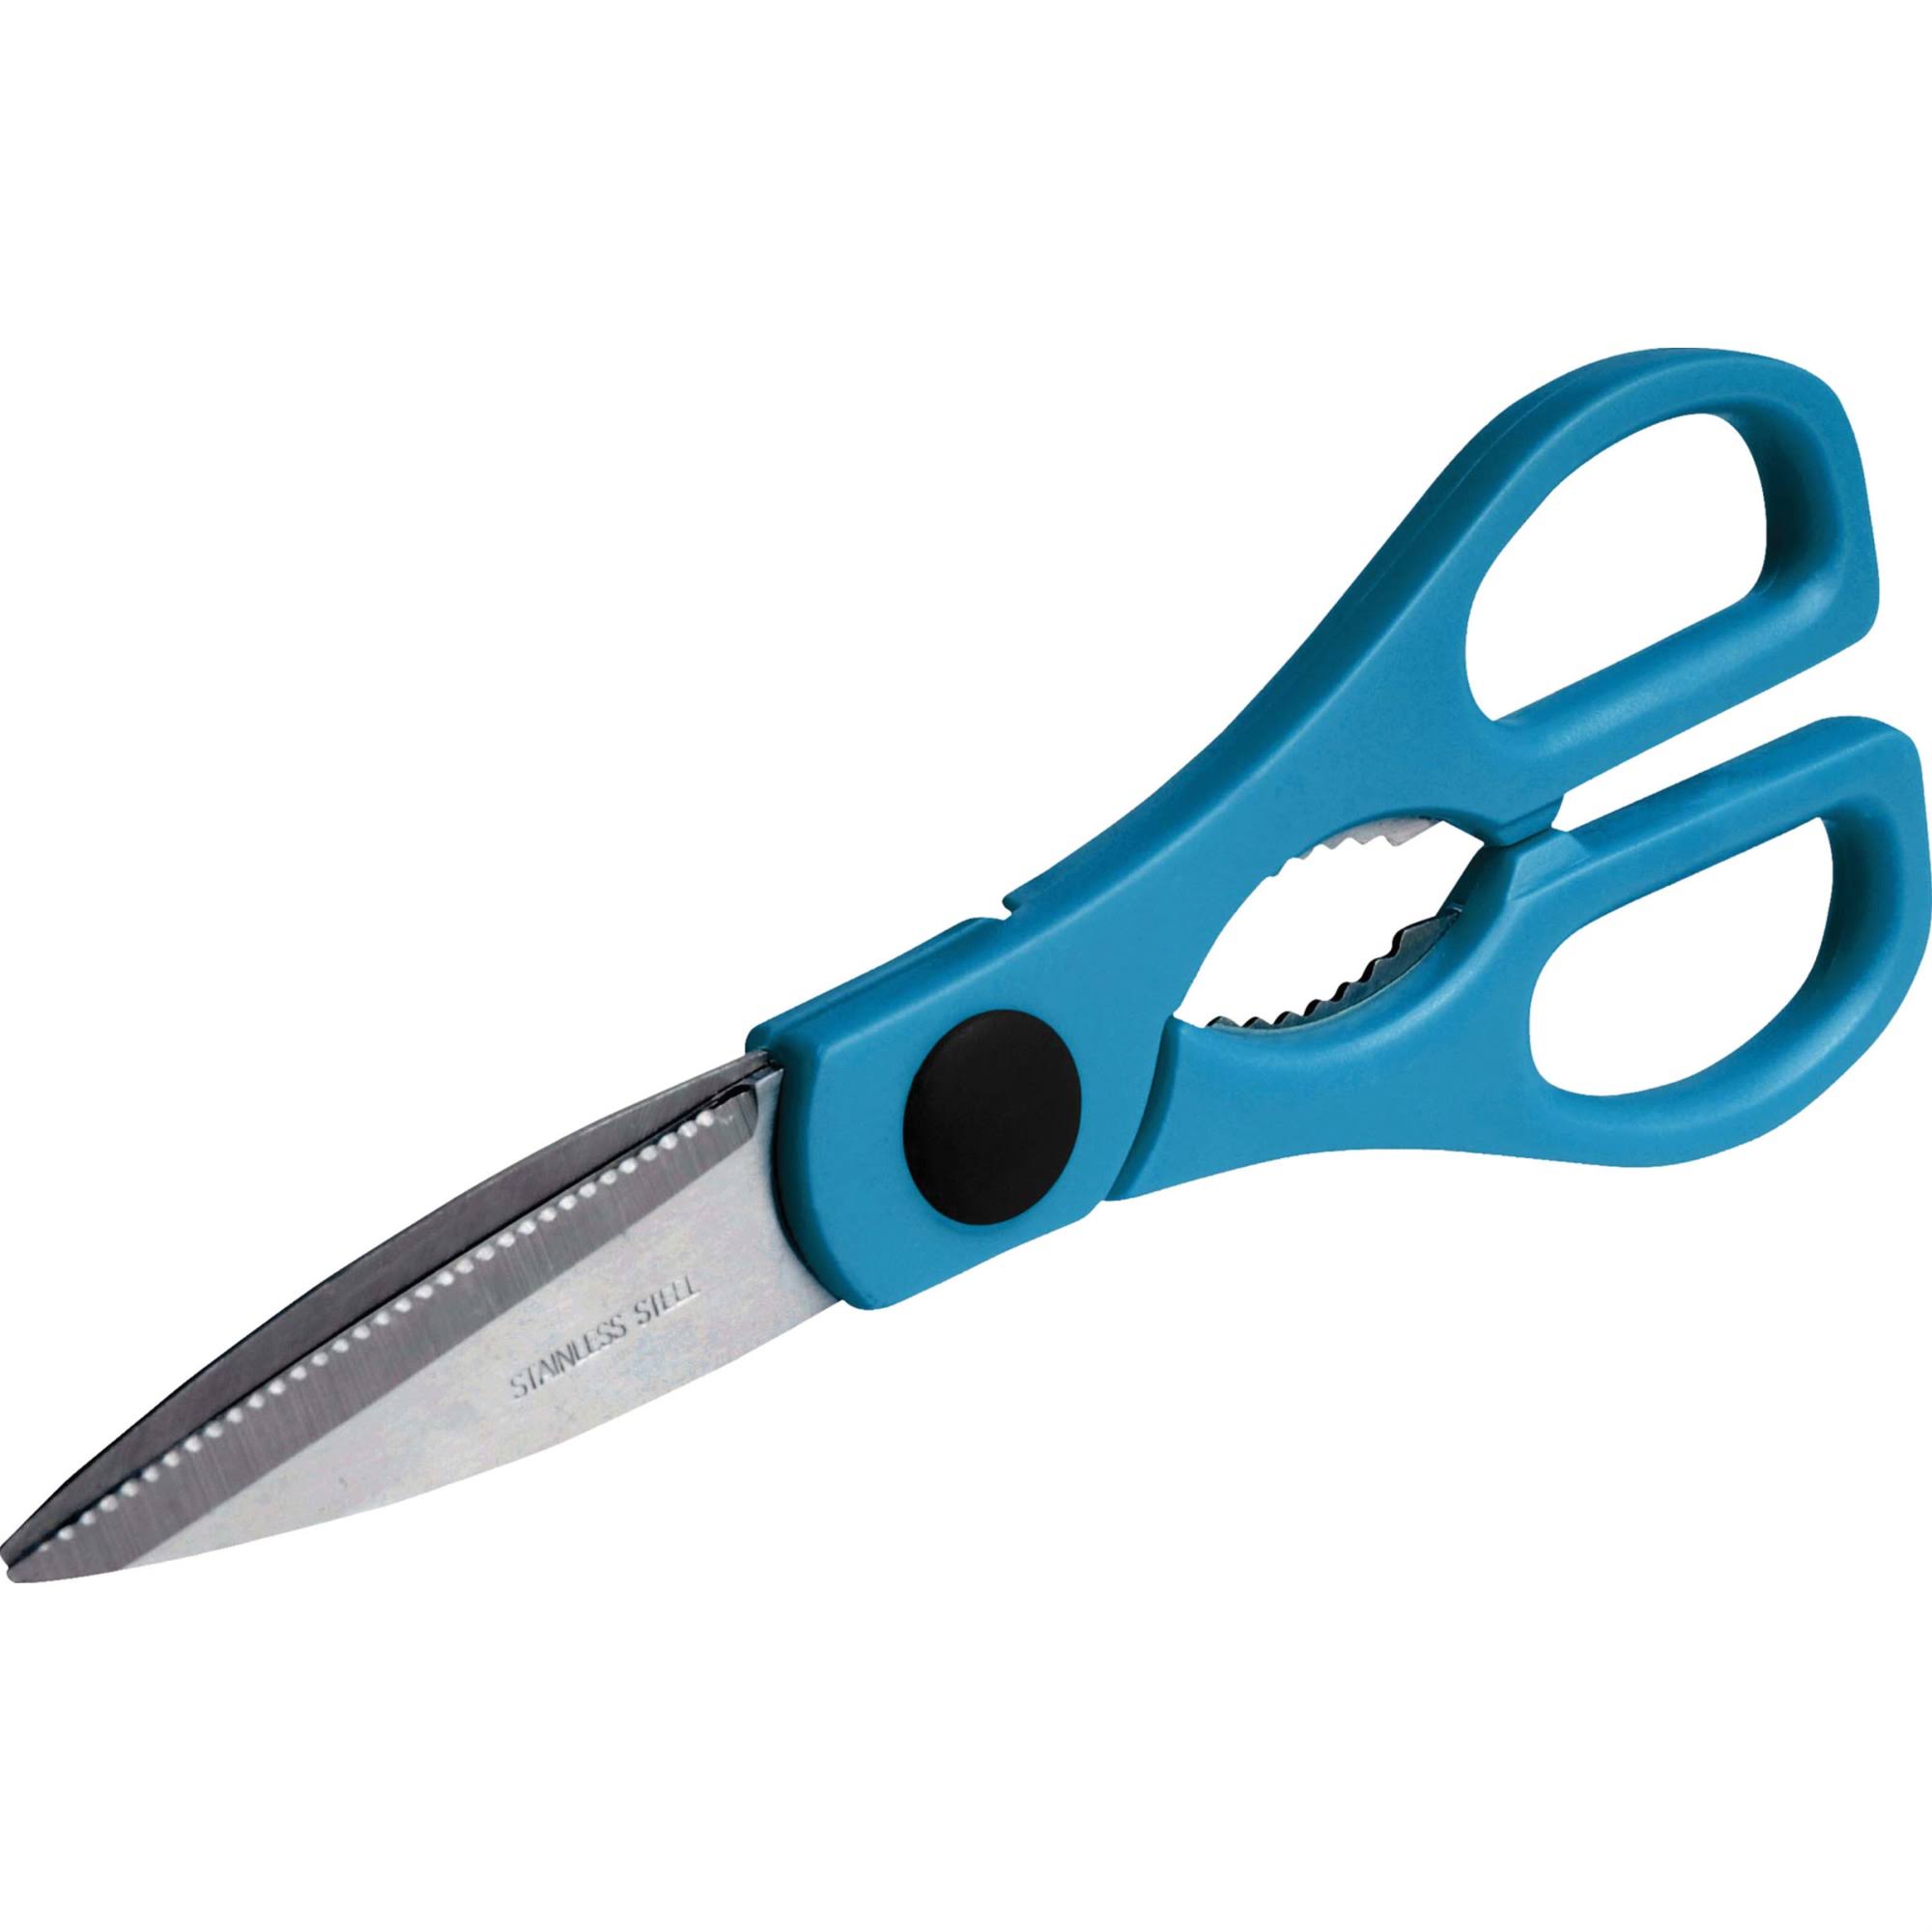 Bond Manufacturing Bloom Household Shears - Stainless